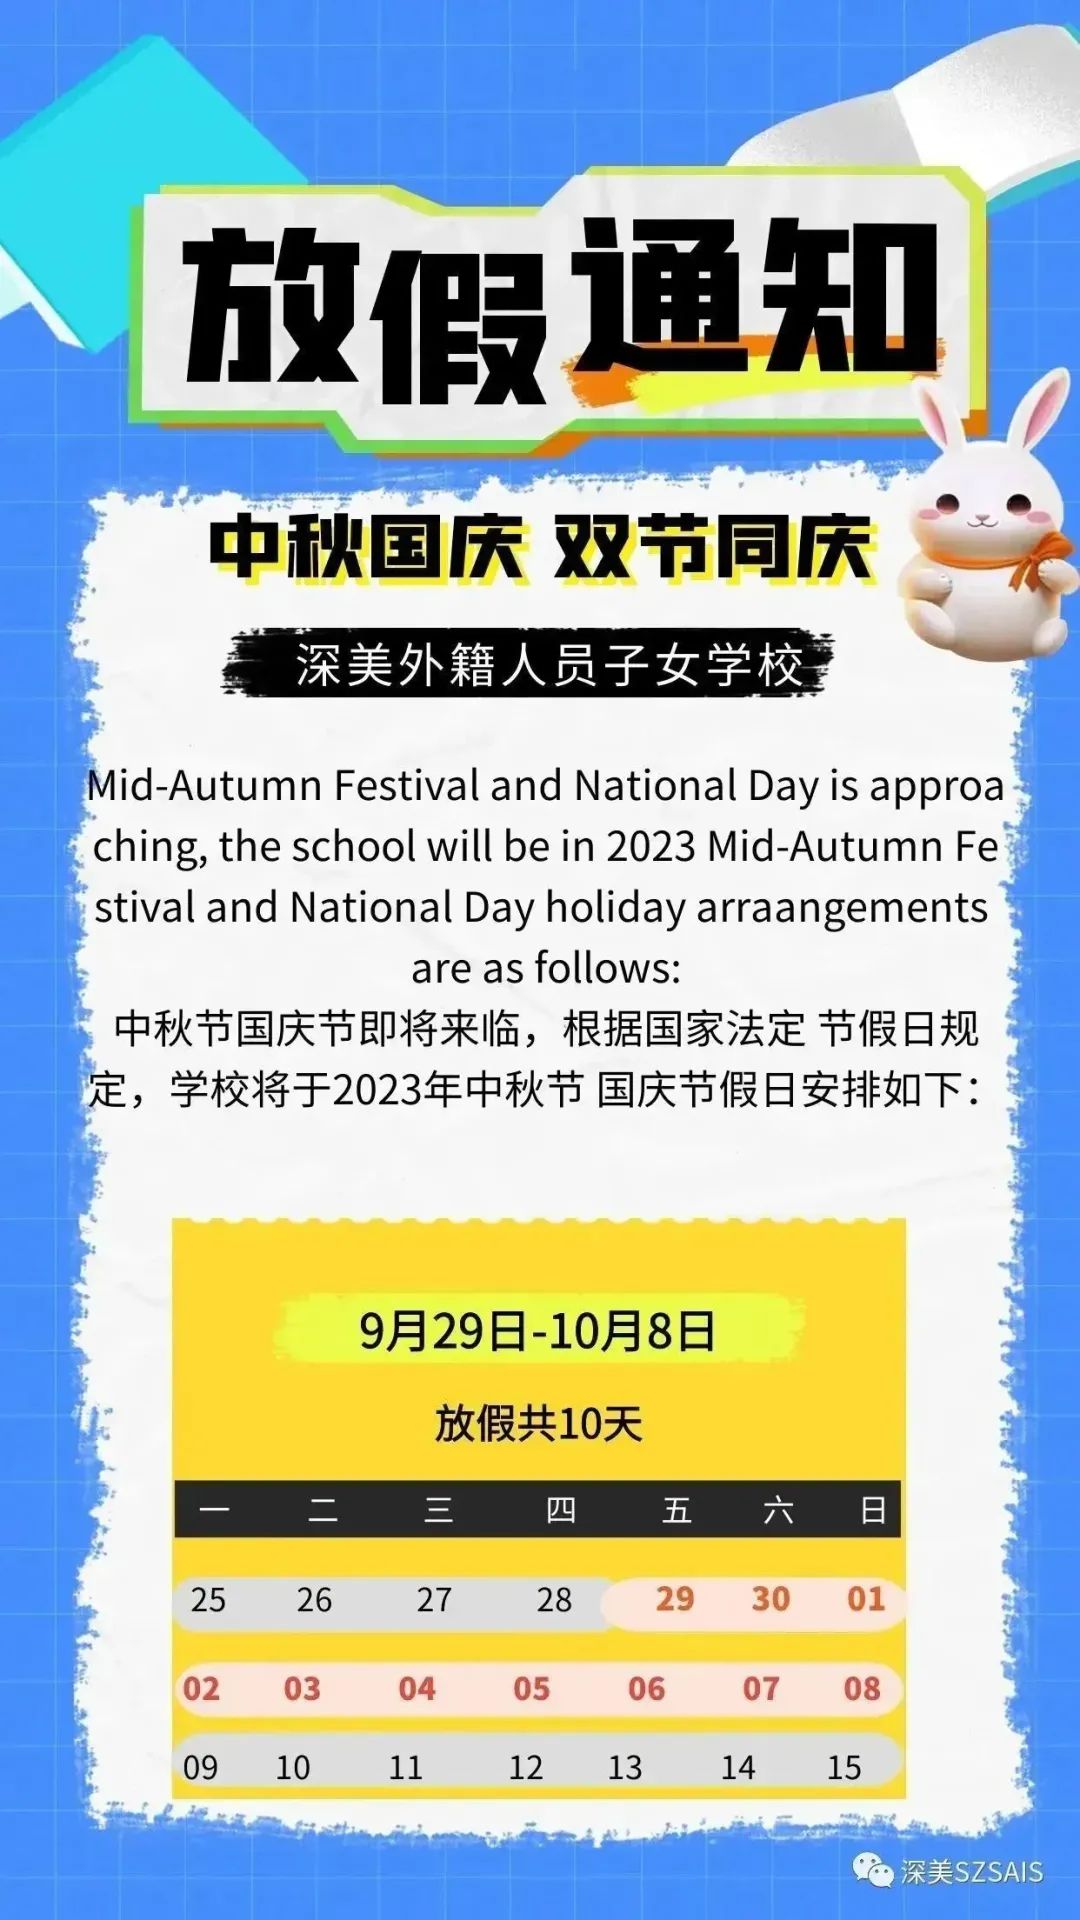 Notice of 2023 National Day Holiday Schedule|关于我校2023年国庆节放假安排的通知